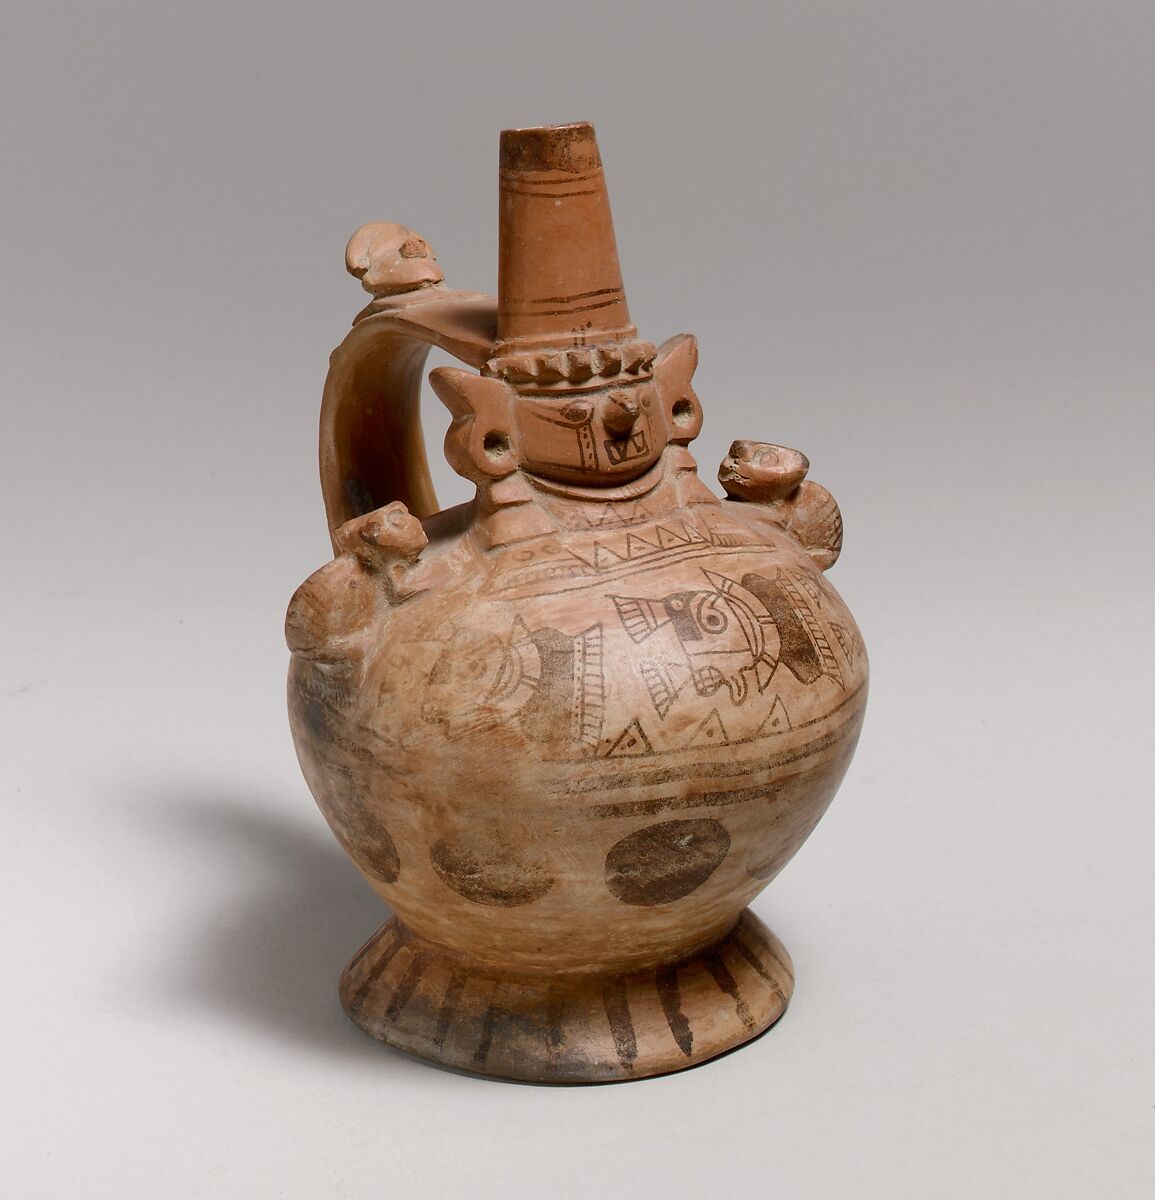 Bottle with mythic figure, Lambayeque (Sicán) artist(s), Ceramic, slip, post-fire pigment, Lambayeque (Sicán) 